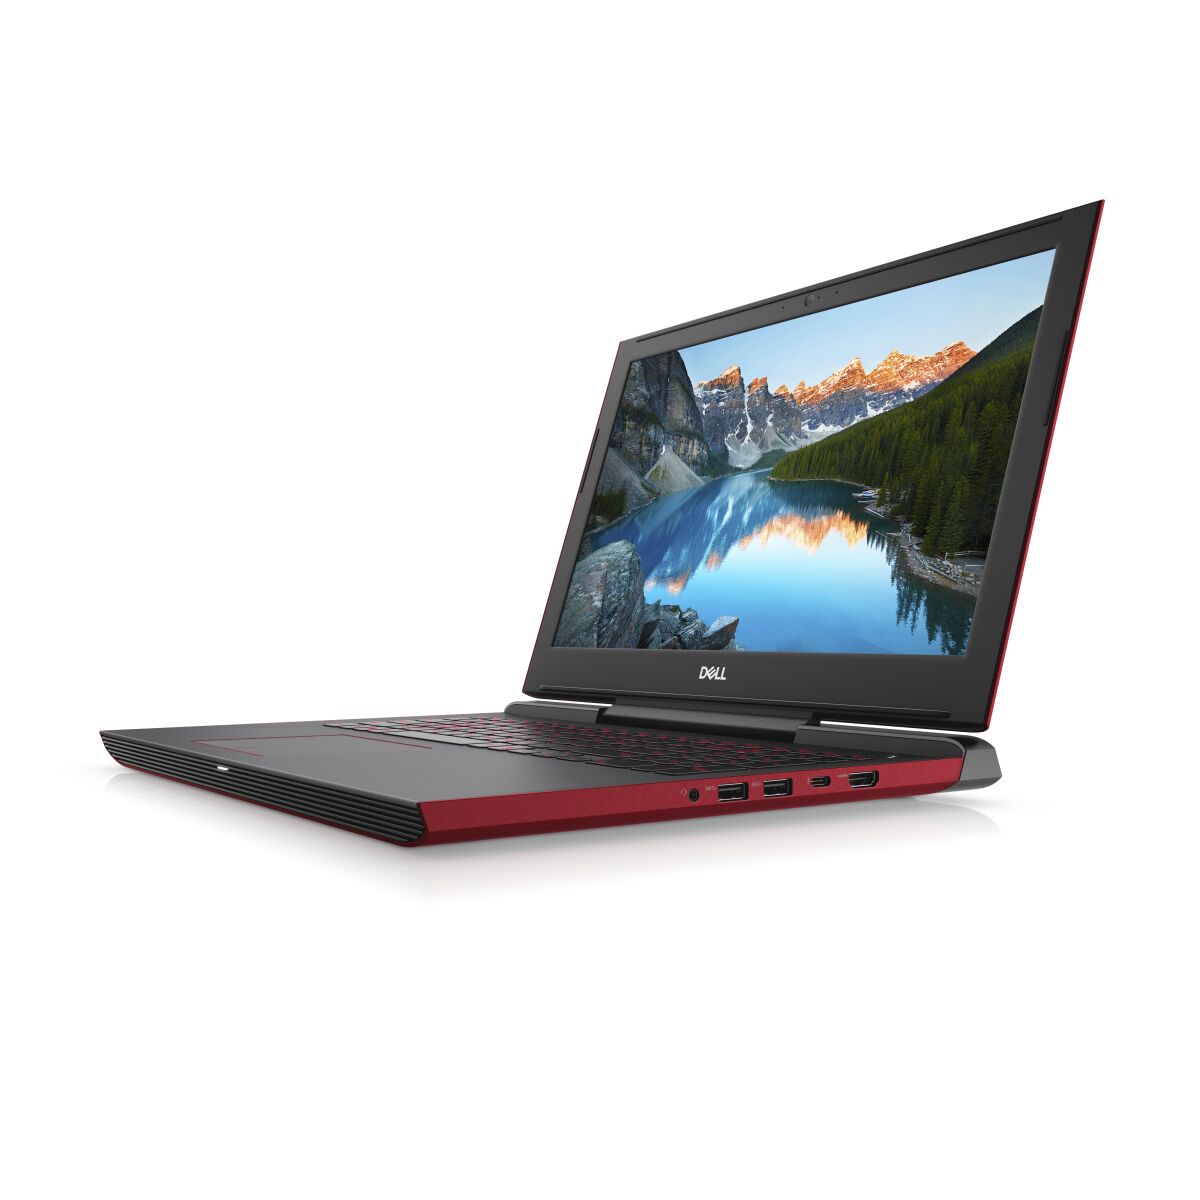 DELL Inspiron 7577 - 7577-0804 laptop specifications